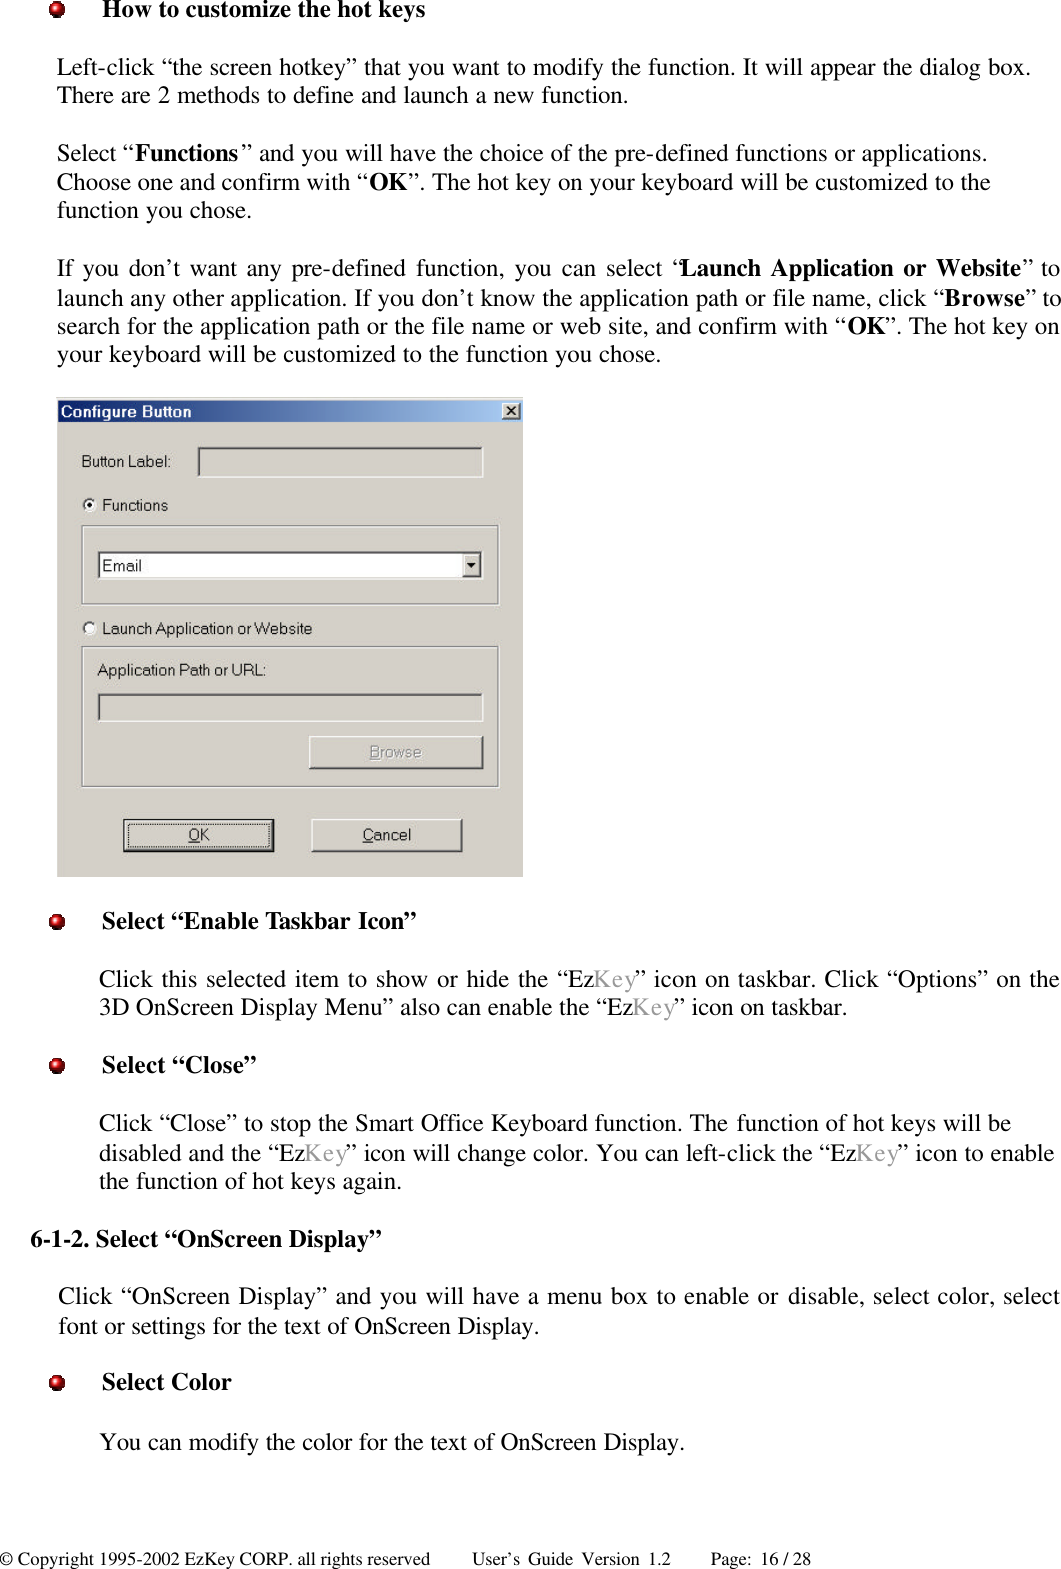 © Copyright 1995-2002 EzKey CORP. all rights reserved     User’s Guide Version 1.2     Page: 16 / 28  How to customize the hot keys Left-click “the screen hotkey” that you want to modify the function. It will appear the dialog box. There are 2 methods to define and launch a new function. Select “Functions” and you will have the choice of the pre-defined functions or applications. Choose one and confirm with “OK”. The hot key on your keyboard will be customized to the function you chose. If you don’t want any pre-defined function, you can select “Launch Application or Website” to launch any other application. If you don’t know the application path or file name, click “Browse” to search for the application path or the file name or web site, and confirm with “OK”. The hot key on your keyboard will be customized to the function you chose.   Select “Enable Taskbar Icon” Click this selected item to show or hide the “EzKey” icon on taskbar. Click “Options” on the 3D OnScreen Display Menu” also can enable the “EzKey” icon on taskbar.  Select “Close” Click “Close” to stop the Smart Office Keyboard function. The function of hot keys will be disabled and the “EzKey” icon will change color. You can left-click the “EzKey” icon to enable the function of hot keys again. 6-1-2. Select “OnScreen Display” Click “OnScreen Display” and you will have a menu box to enable or disable, select color, select font or settings for the text of OnScreen Display.  Select Color You can modify the color for the text of OnScreen Display. 